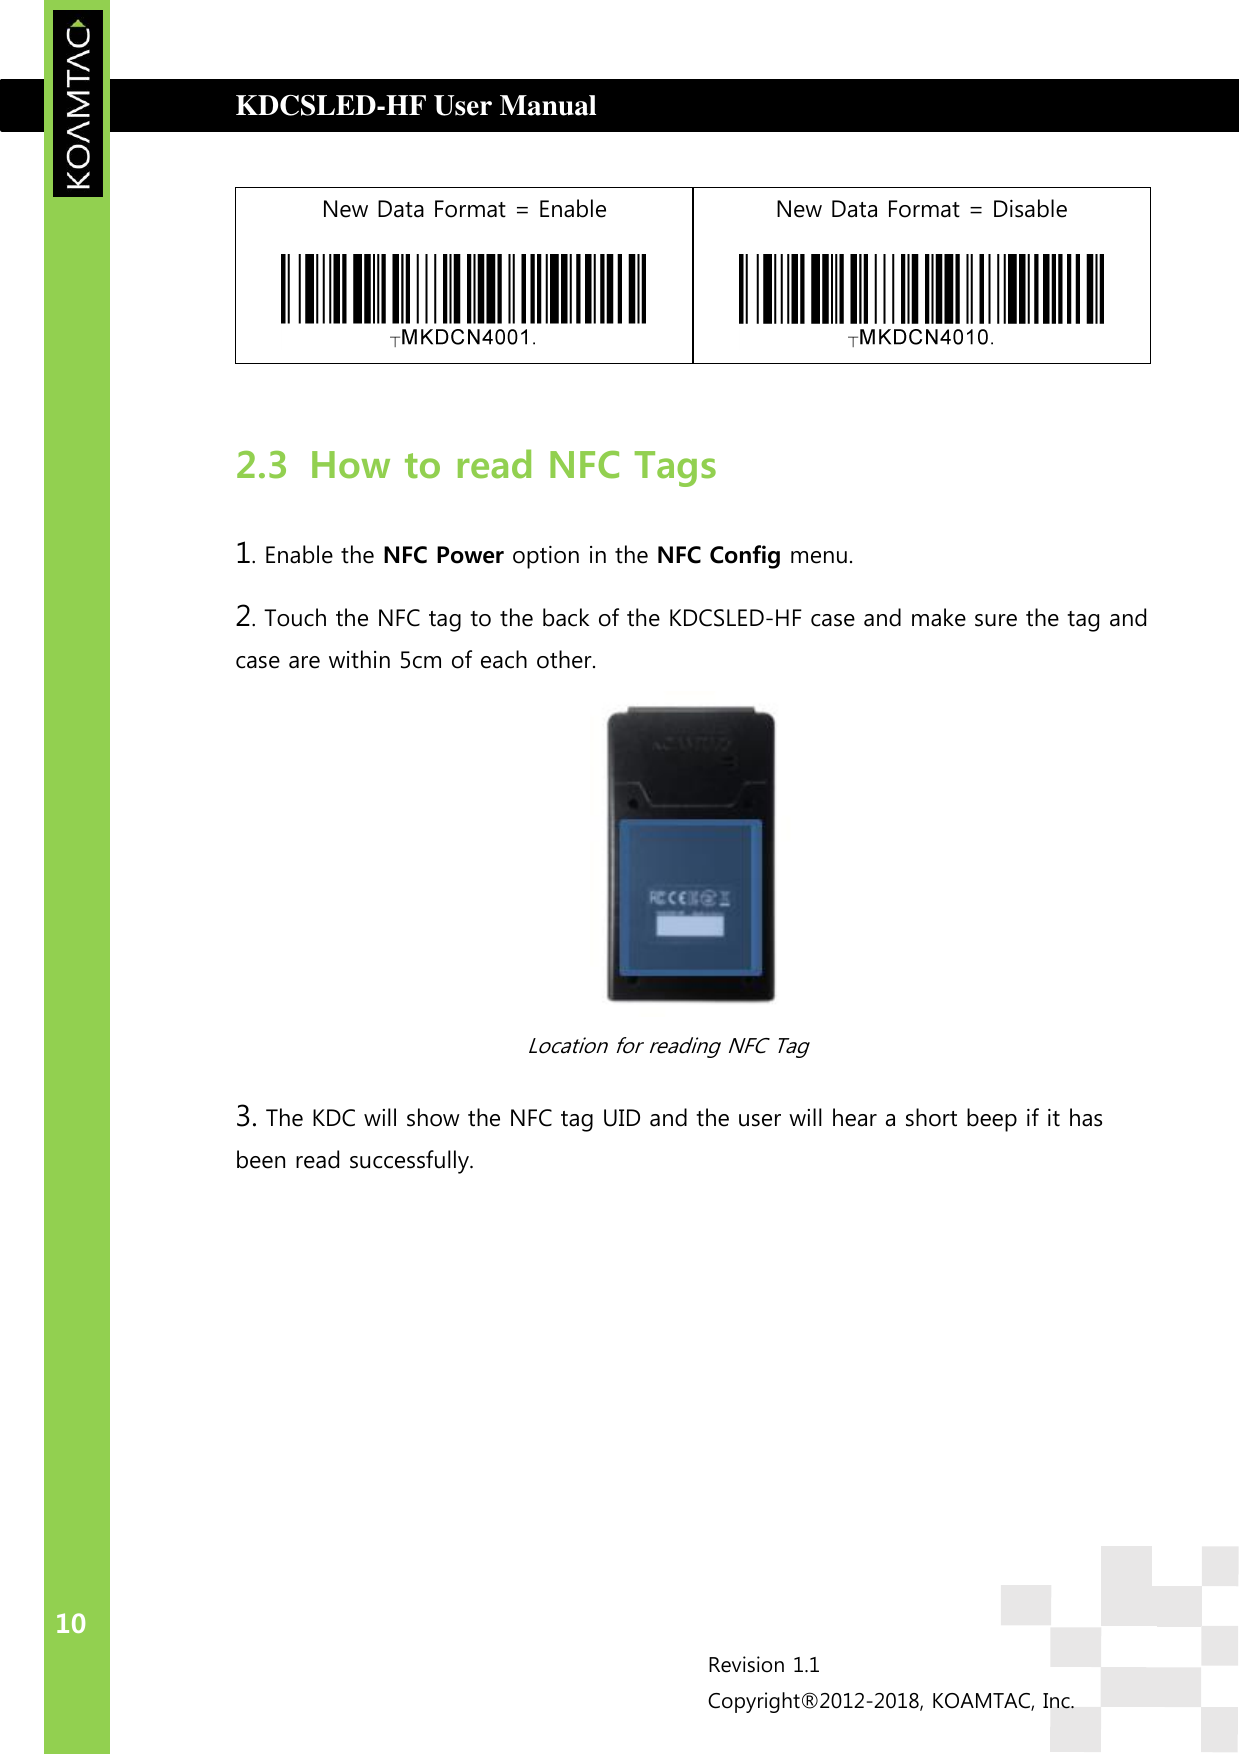  KDCSLED-HF User Manual                                         WARRANTY  10 Revision 1.1 Copyright®2012-2018, KOAMTAC, Inc.  New Data Format = Enable  New Data Format = Disable   2.3 How to read NFC Tags 1. Enable the NFC Power option in the NFC Config menu. 2. Touch the NFC tag to the back of the KDCSLED-HF case and make sure the tag and case are within 5cm of each other.  Location for reading NFC Tag   3. The KDC will show the NFC tag UID and the user will hear a short beep if it has been read successfully.     